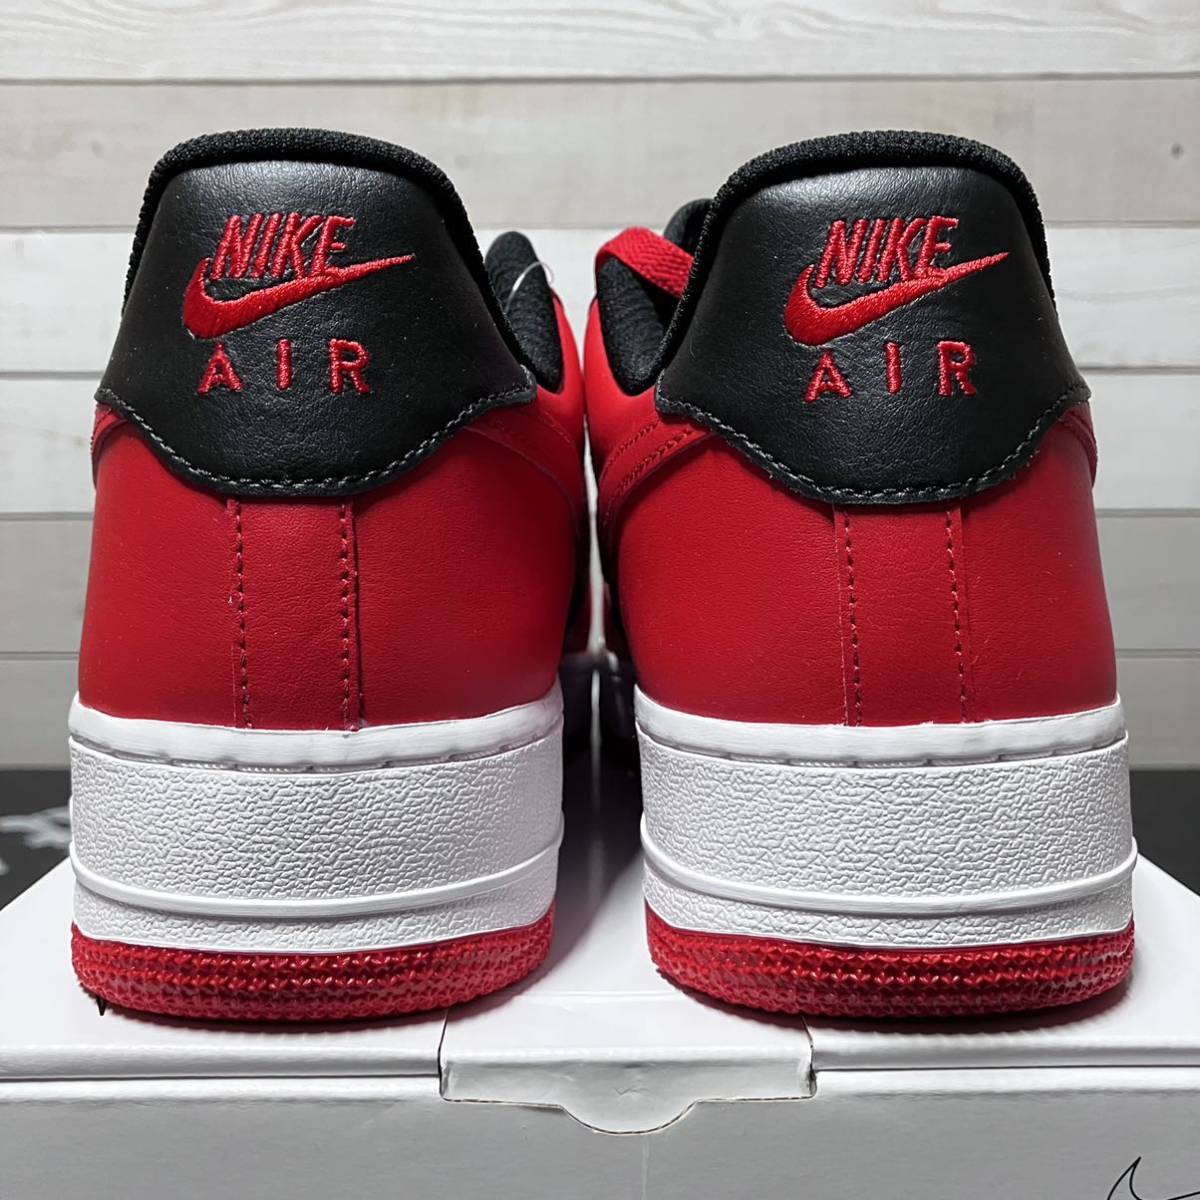 28cm NIKE BY YOU AIR FORCE 1 LOW BRED ナイキ エア フォース ワン ローカット ブレッド ナイキ バイ ユー